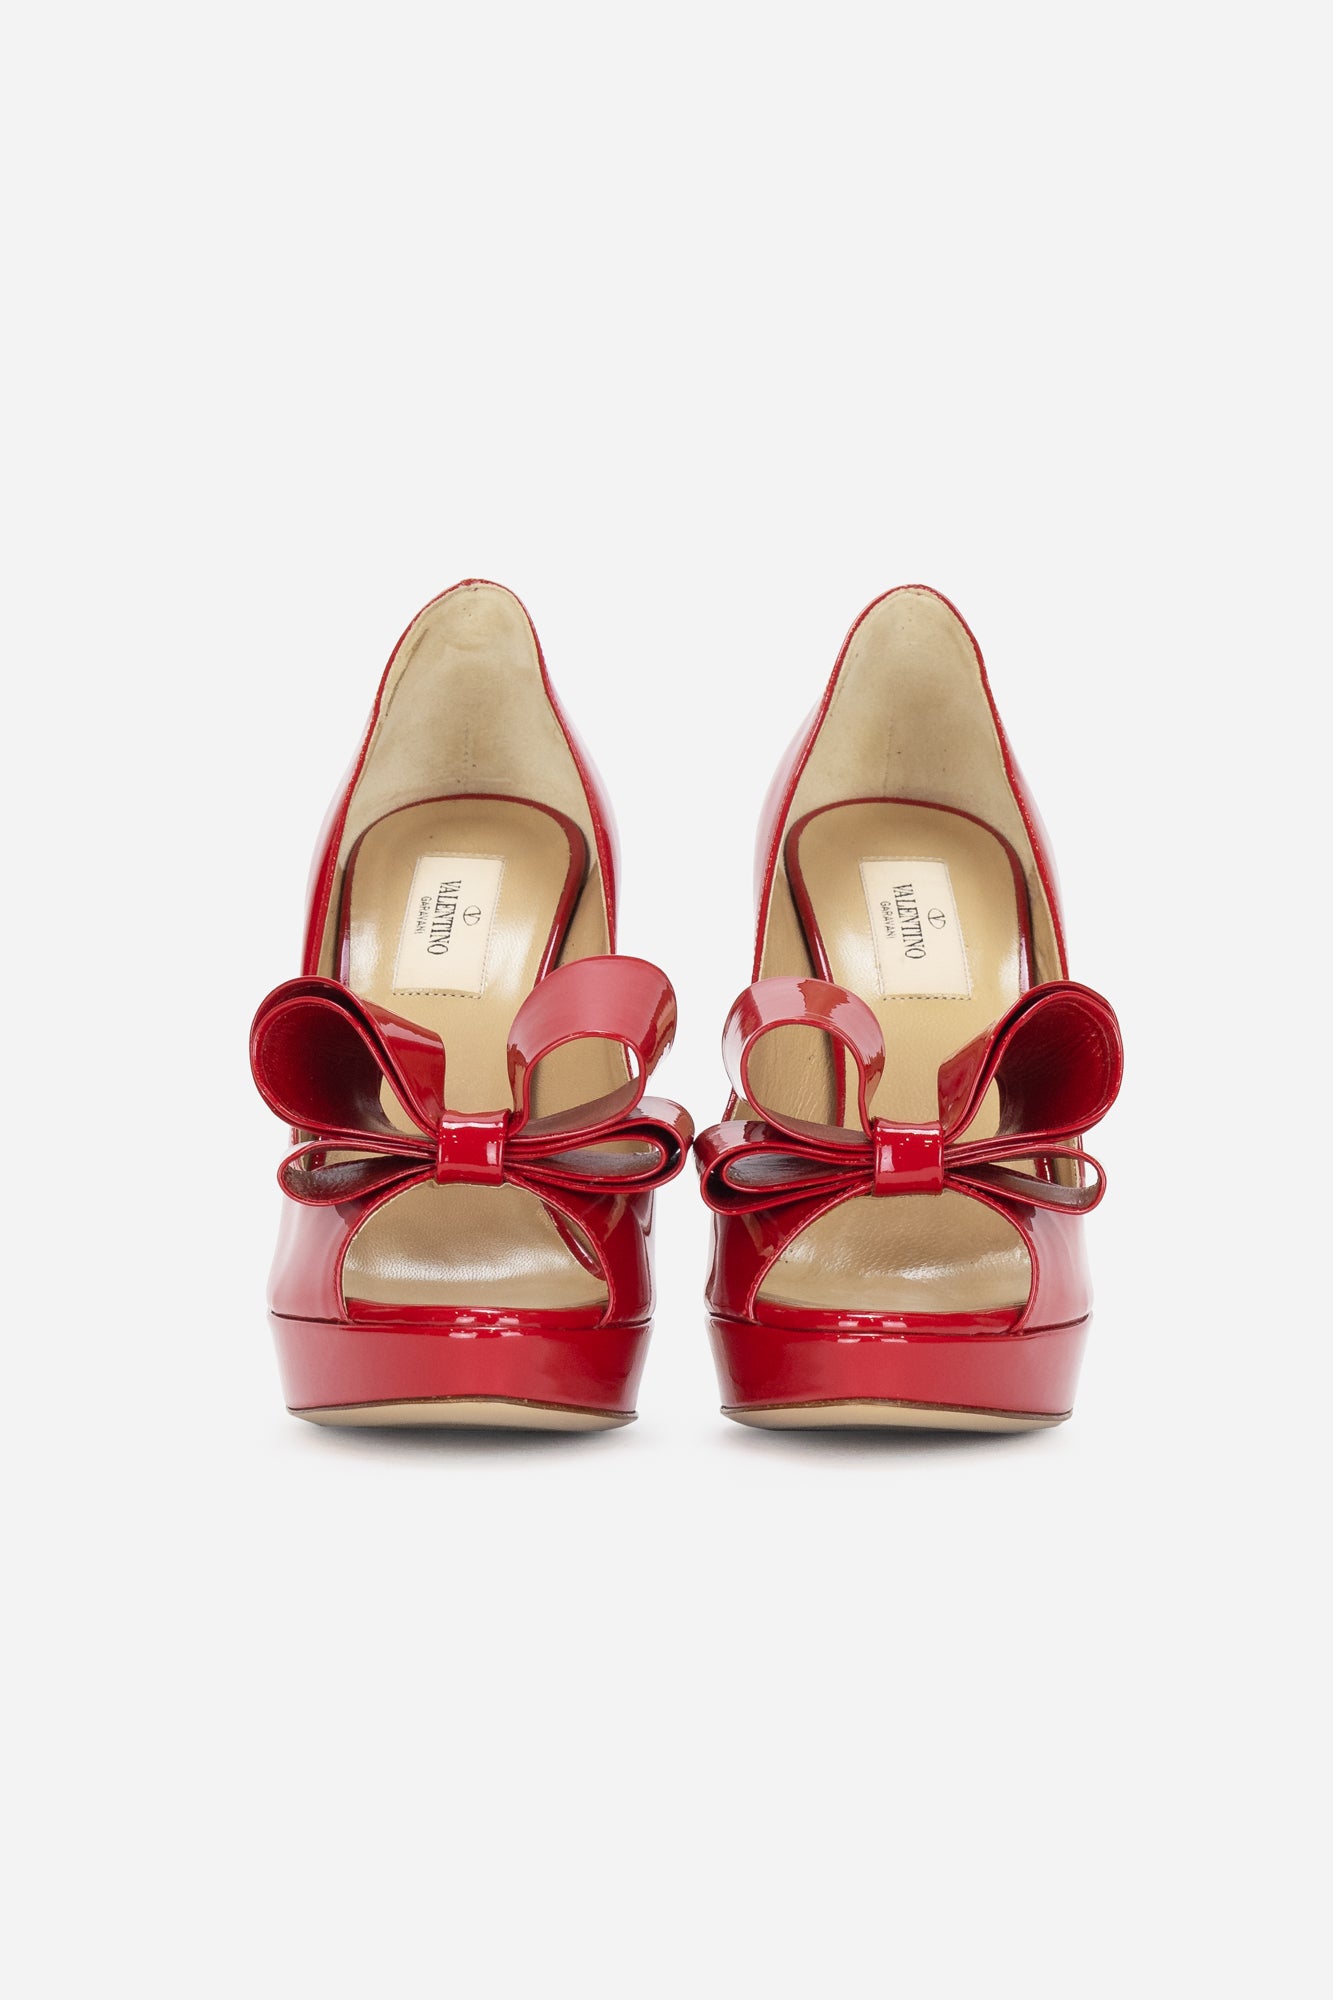 Red Patent Pumps With Bow